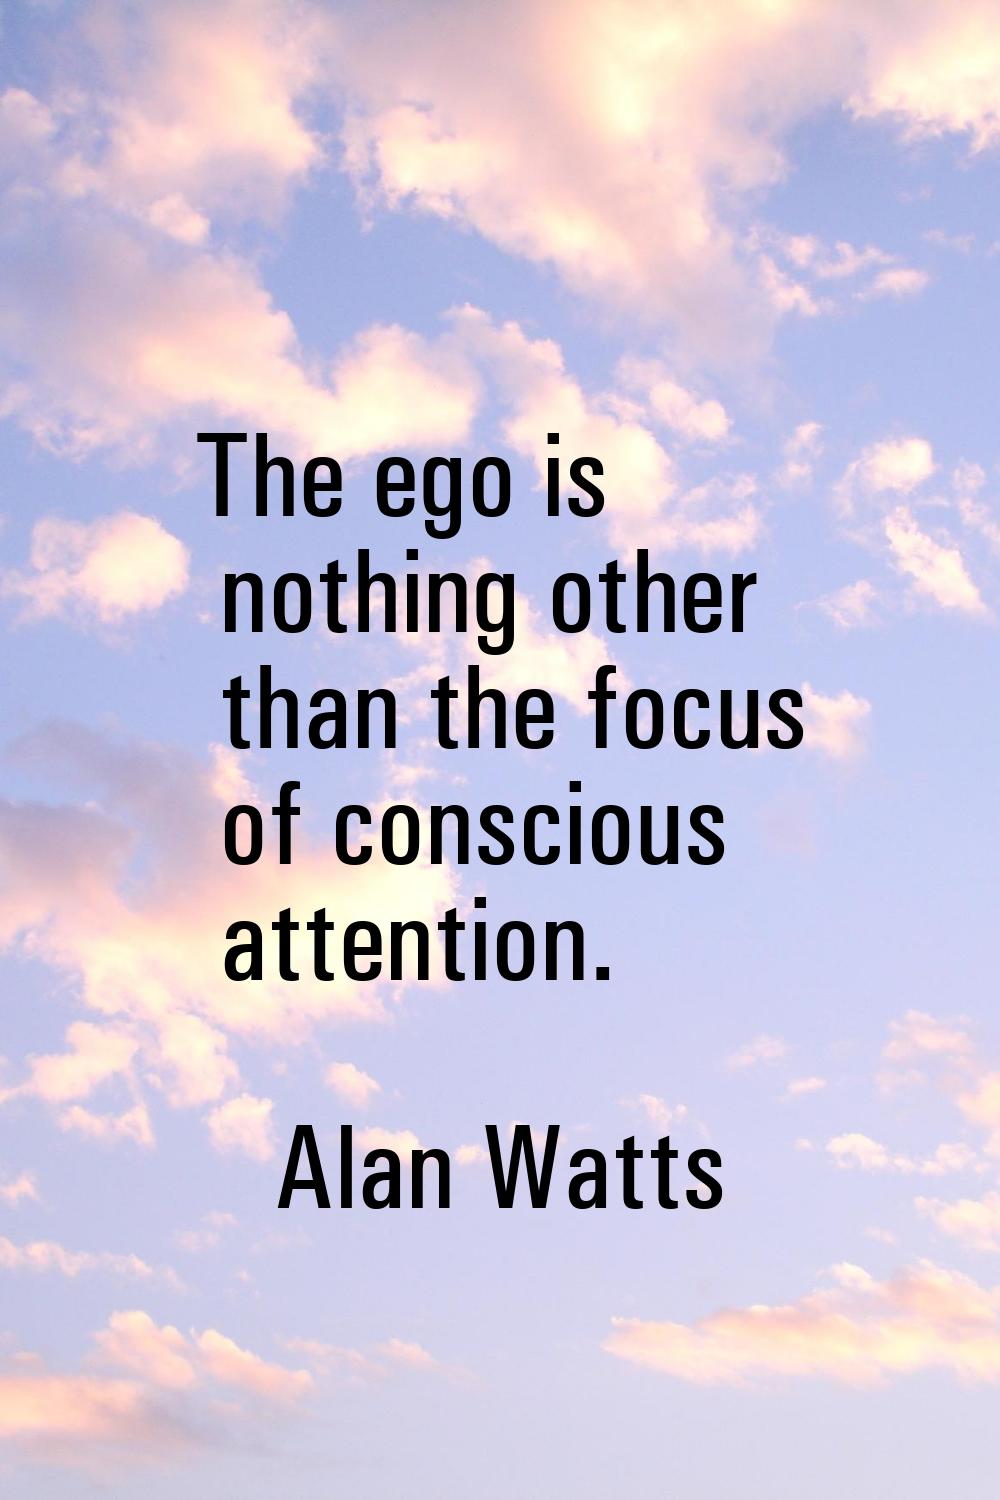 The ego is nothing other than the focus of conscious attention.